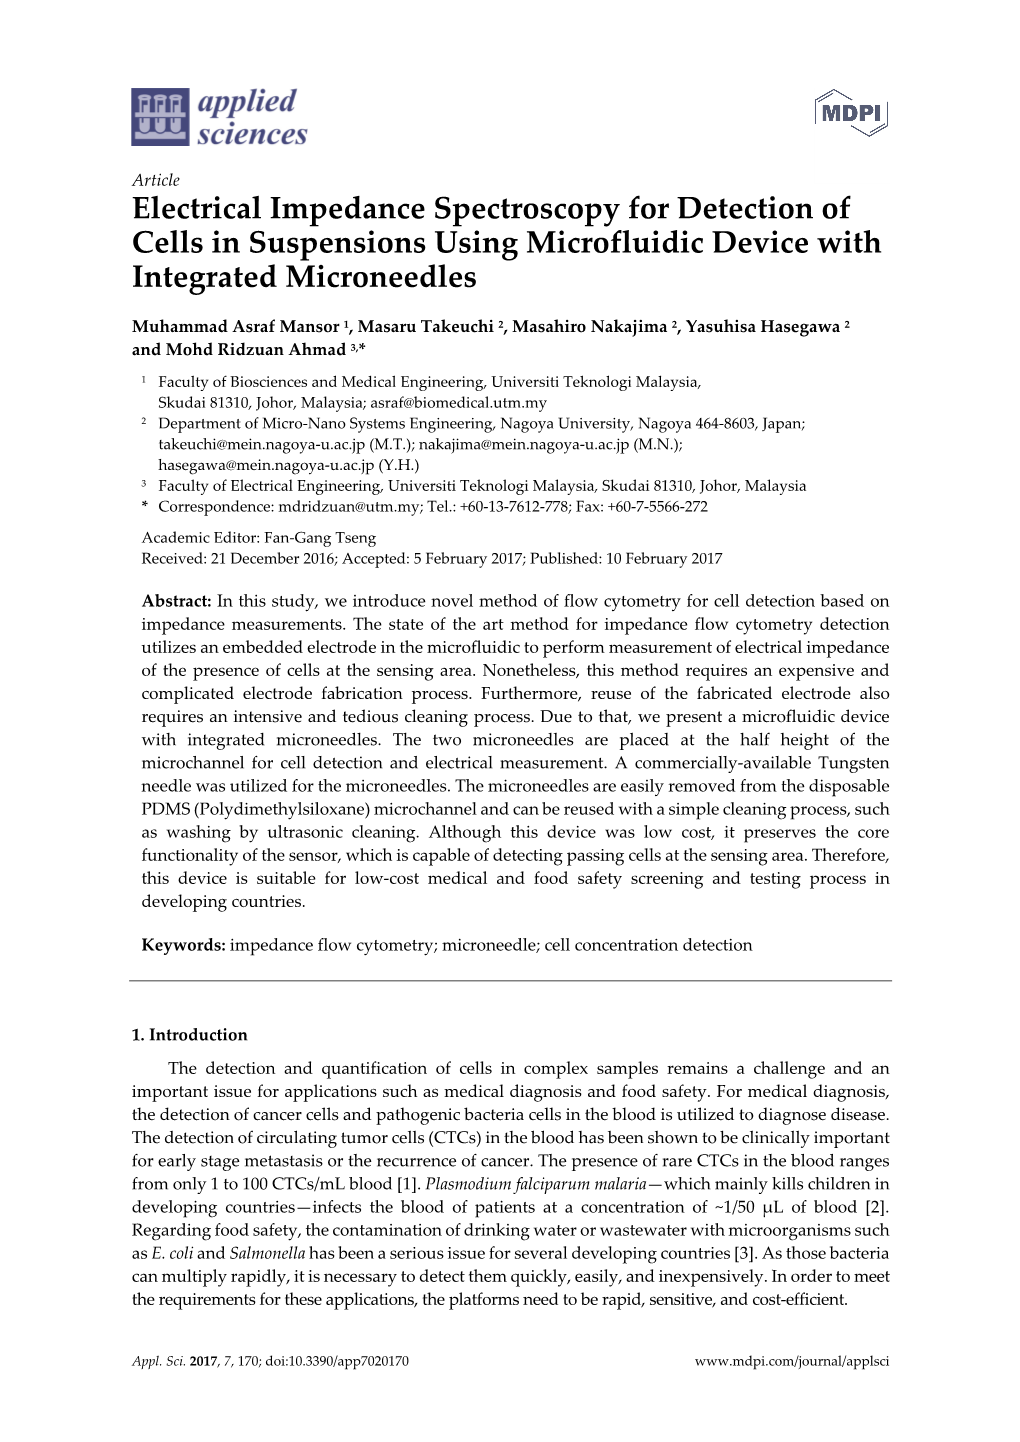 Electrical Impedance Spectroscopy for Detection of Cells in Suspensions Using Microfluidic Device with Integrated Microneedles